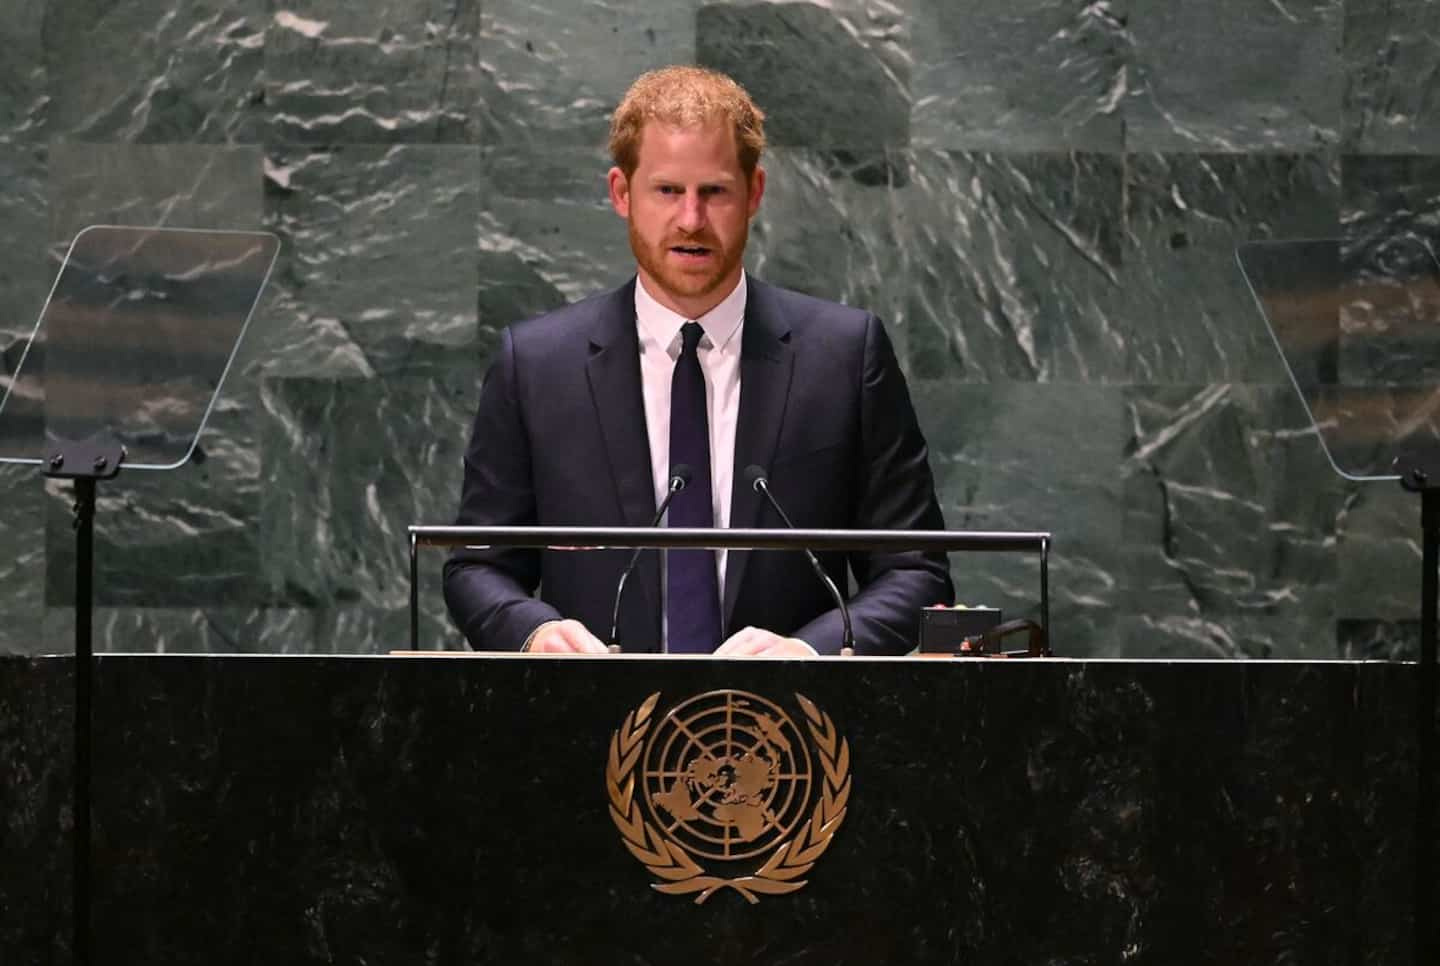 “Our world is on fire again”, denounces Prince Harry at the UN